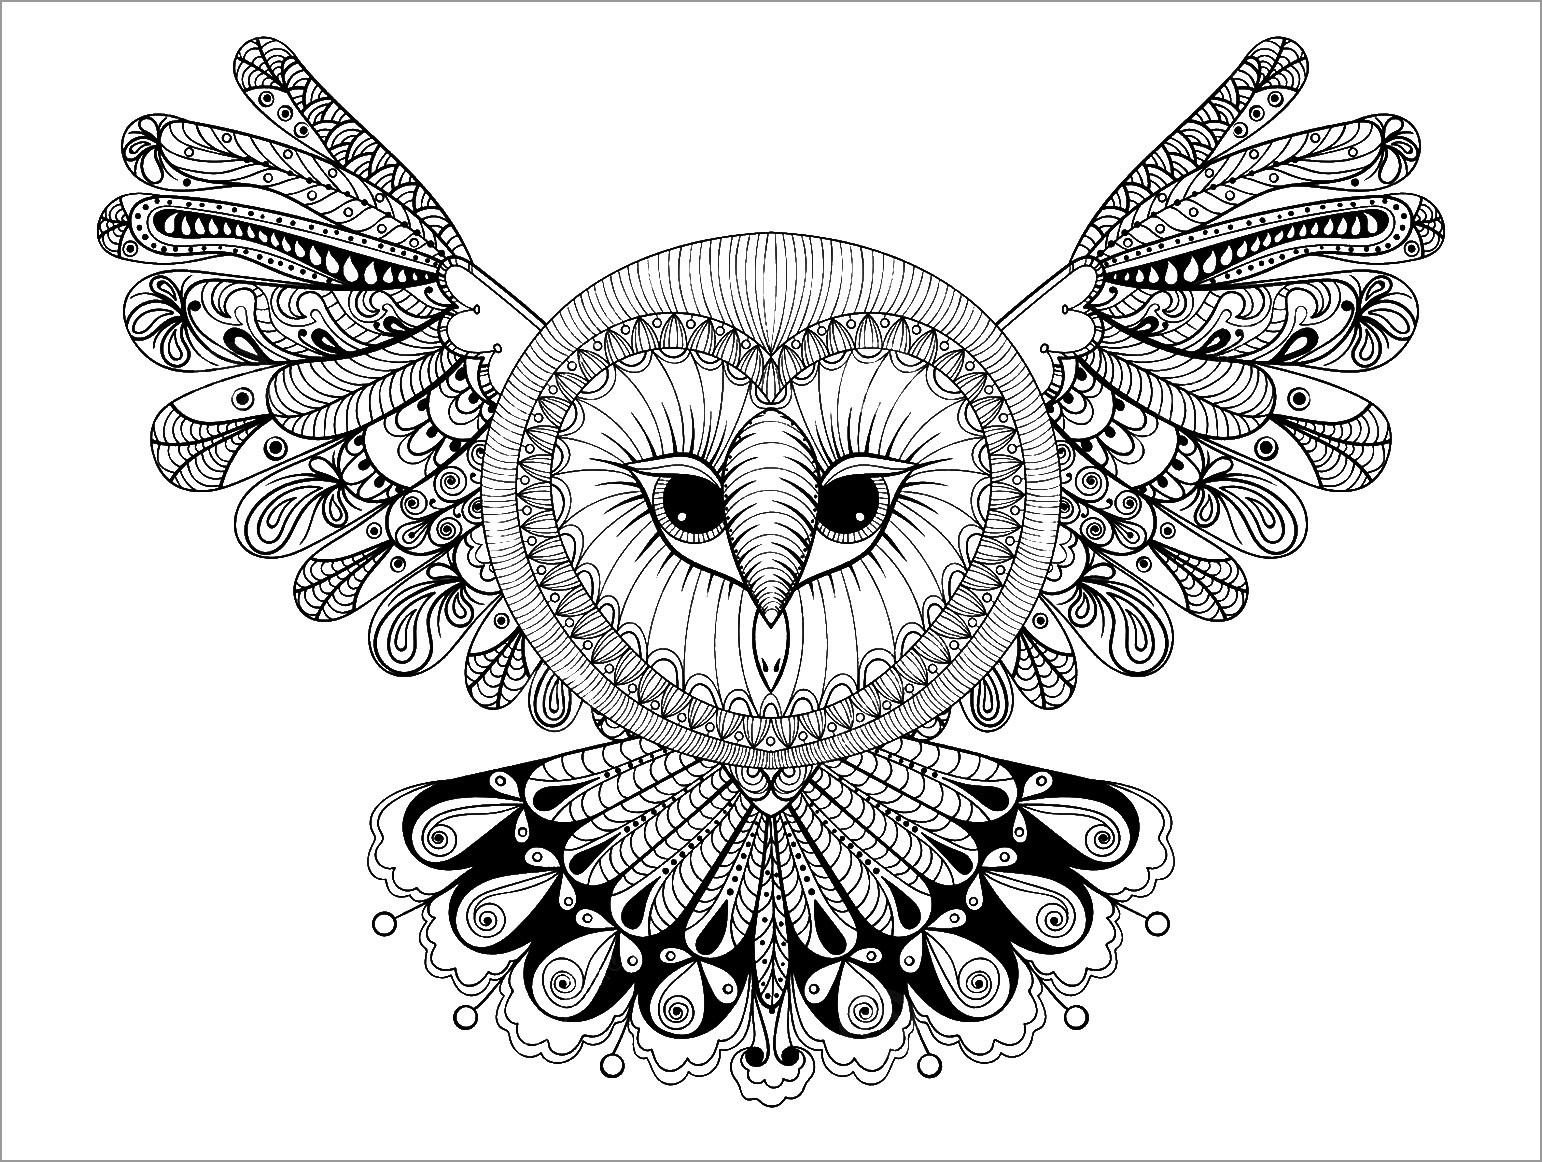 Owl Coloring Page for Adult